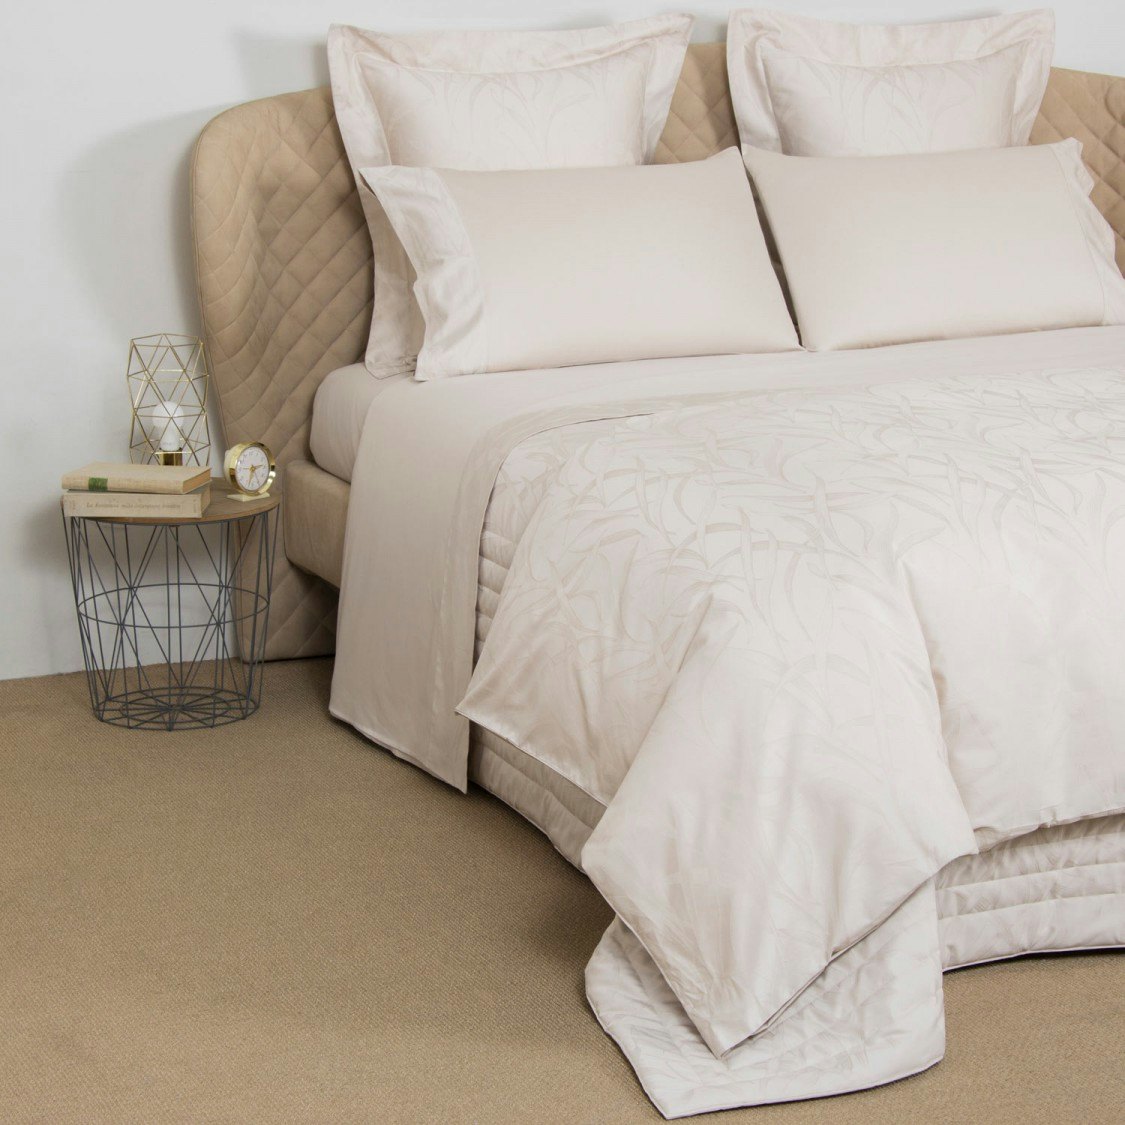 Frette Bedding Is On Sale Up To 80 Percent Off Including Super